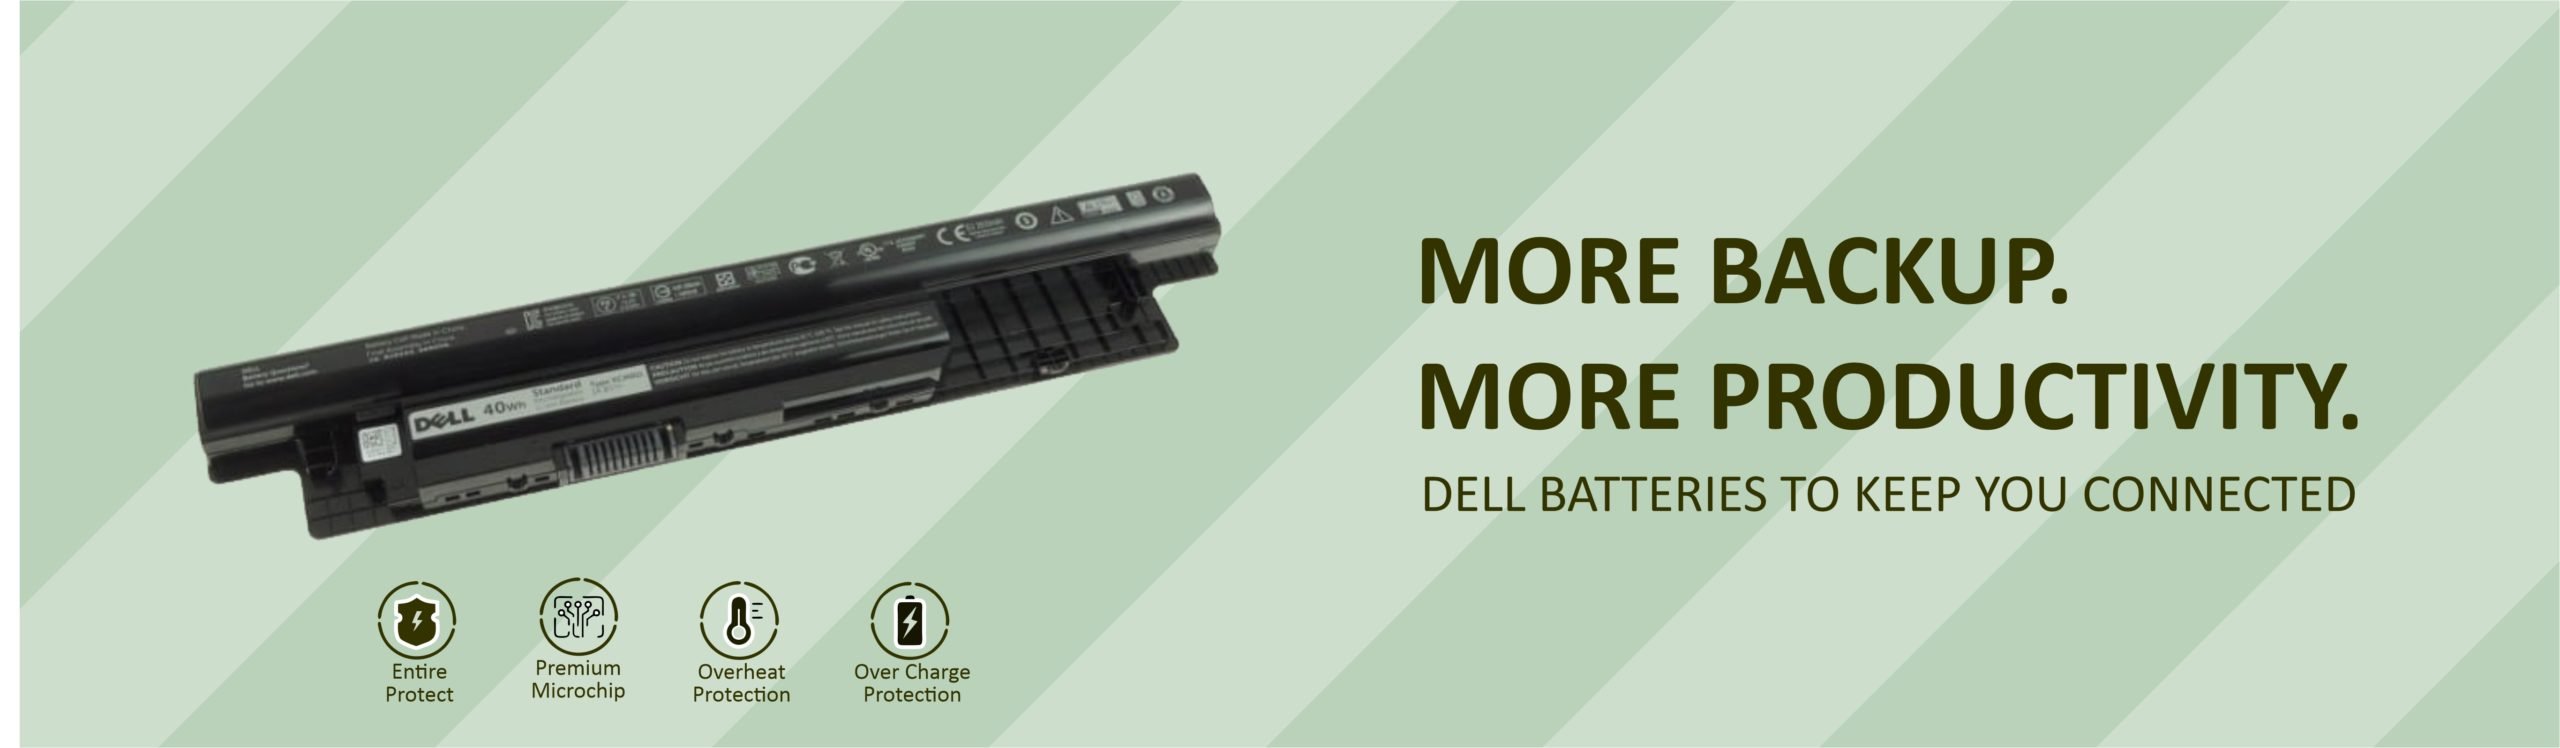 DELL-XCMRD-40WH-BATTERY